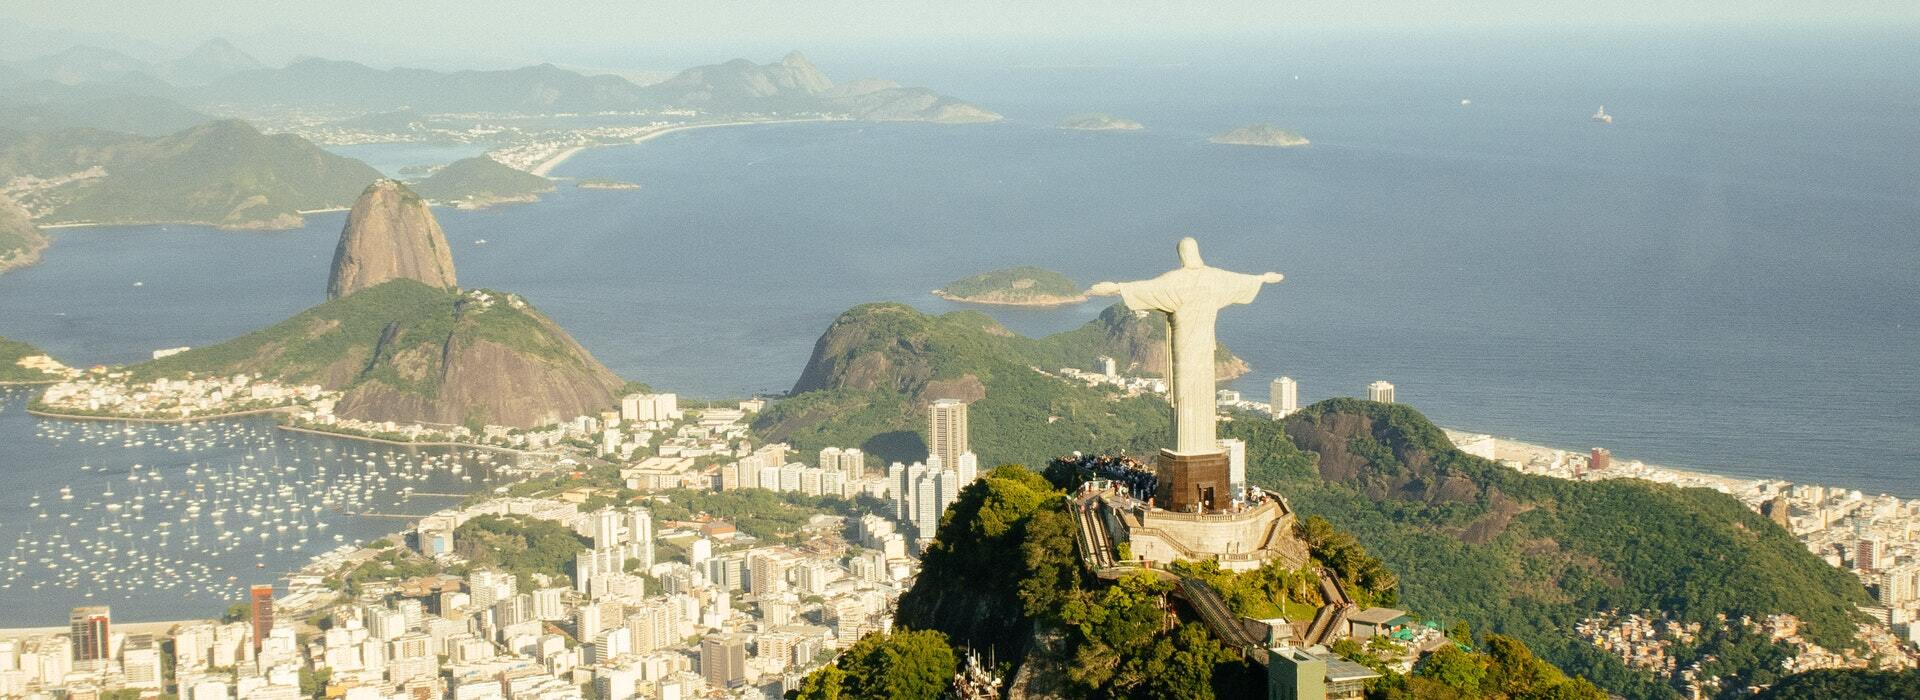 Brazil Tours and Vacation Packages